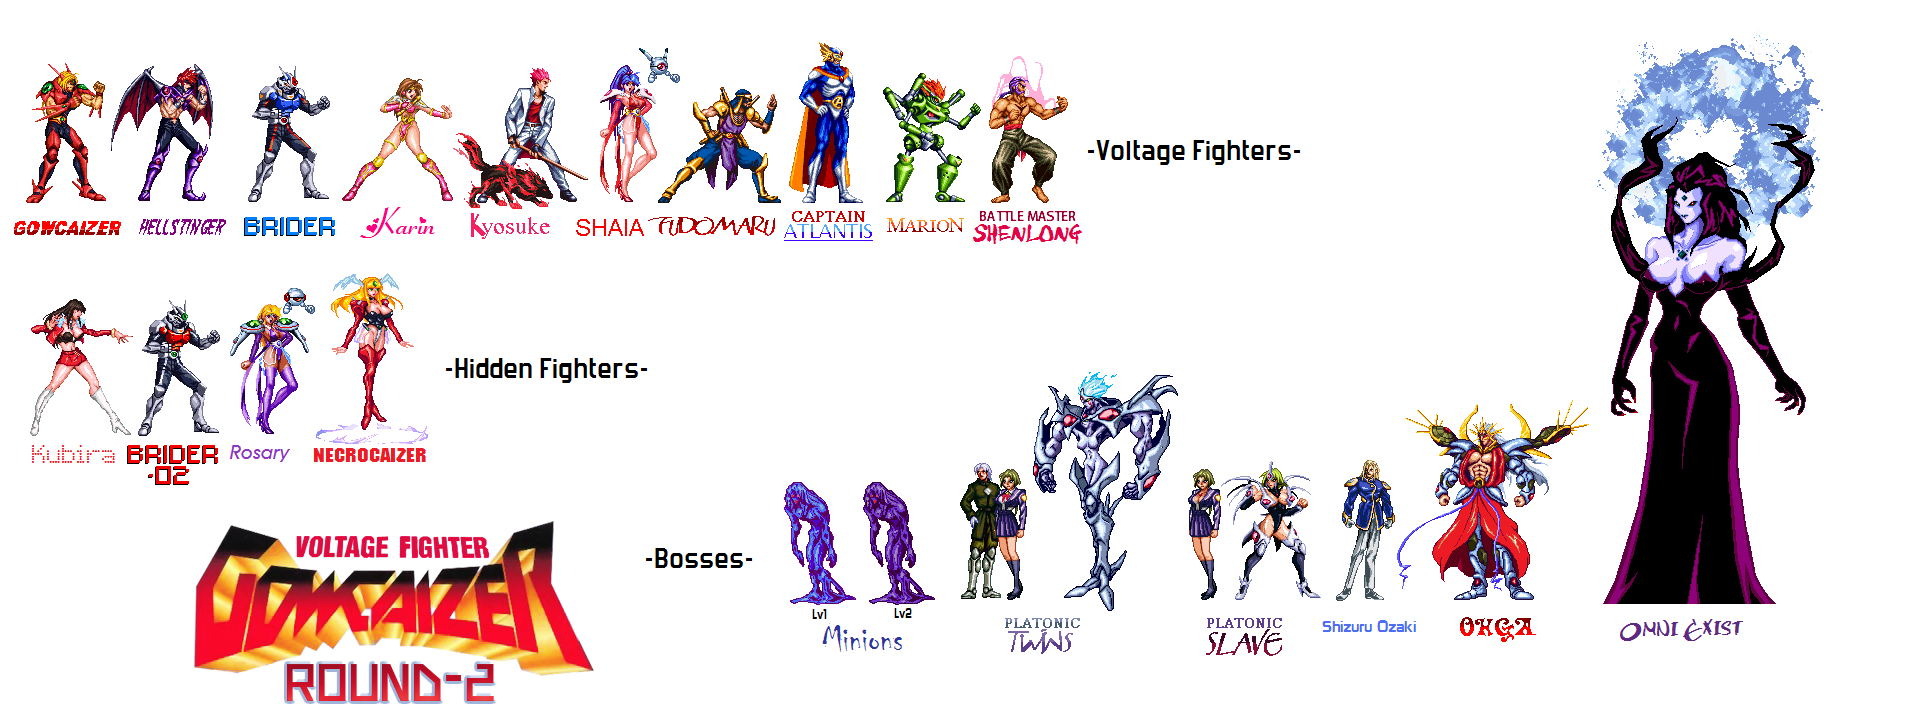 Voltage Fighter Gowcaizer Edited and Created Chars 